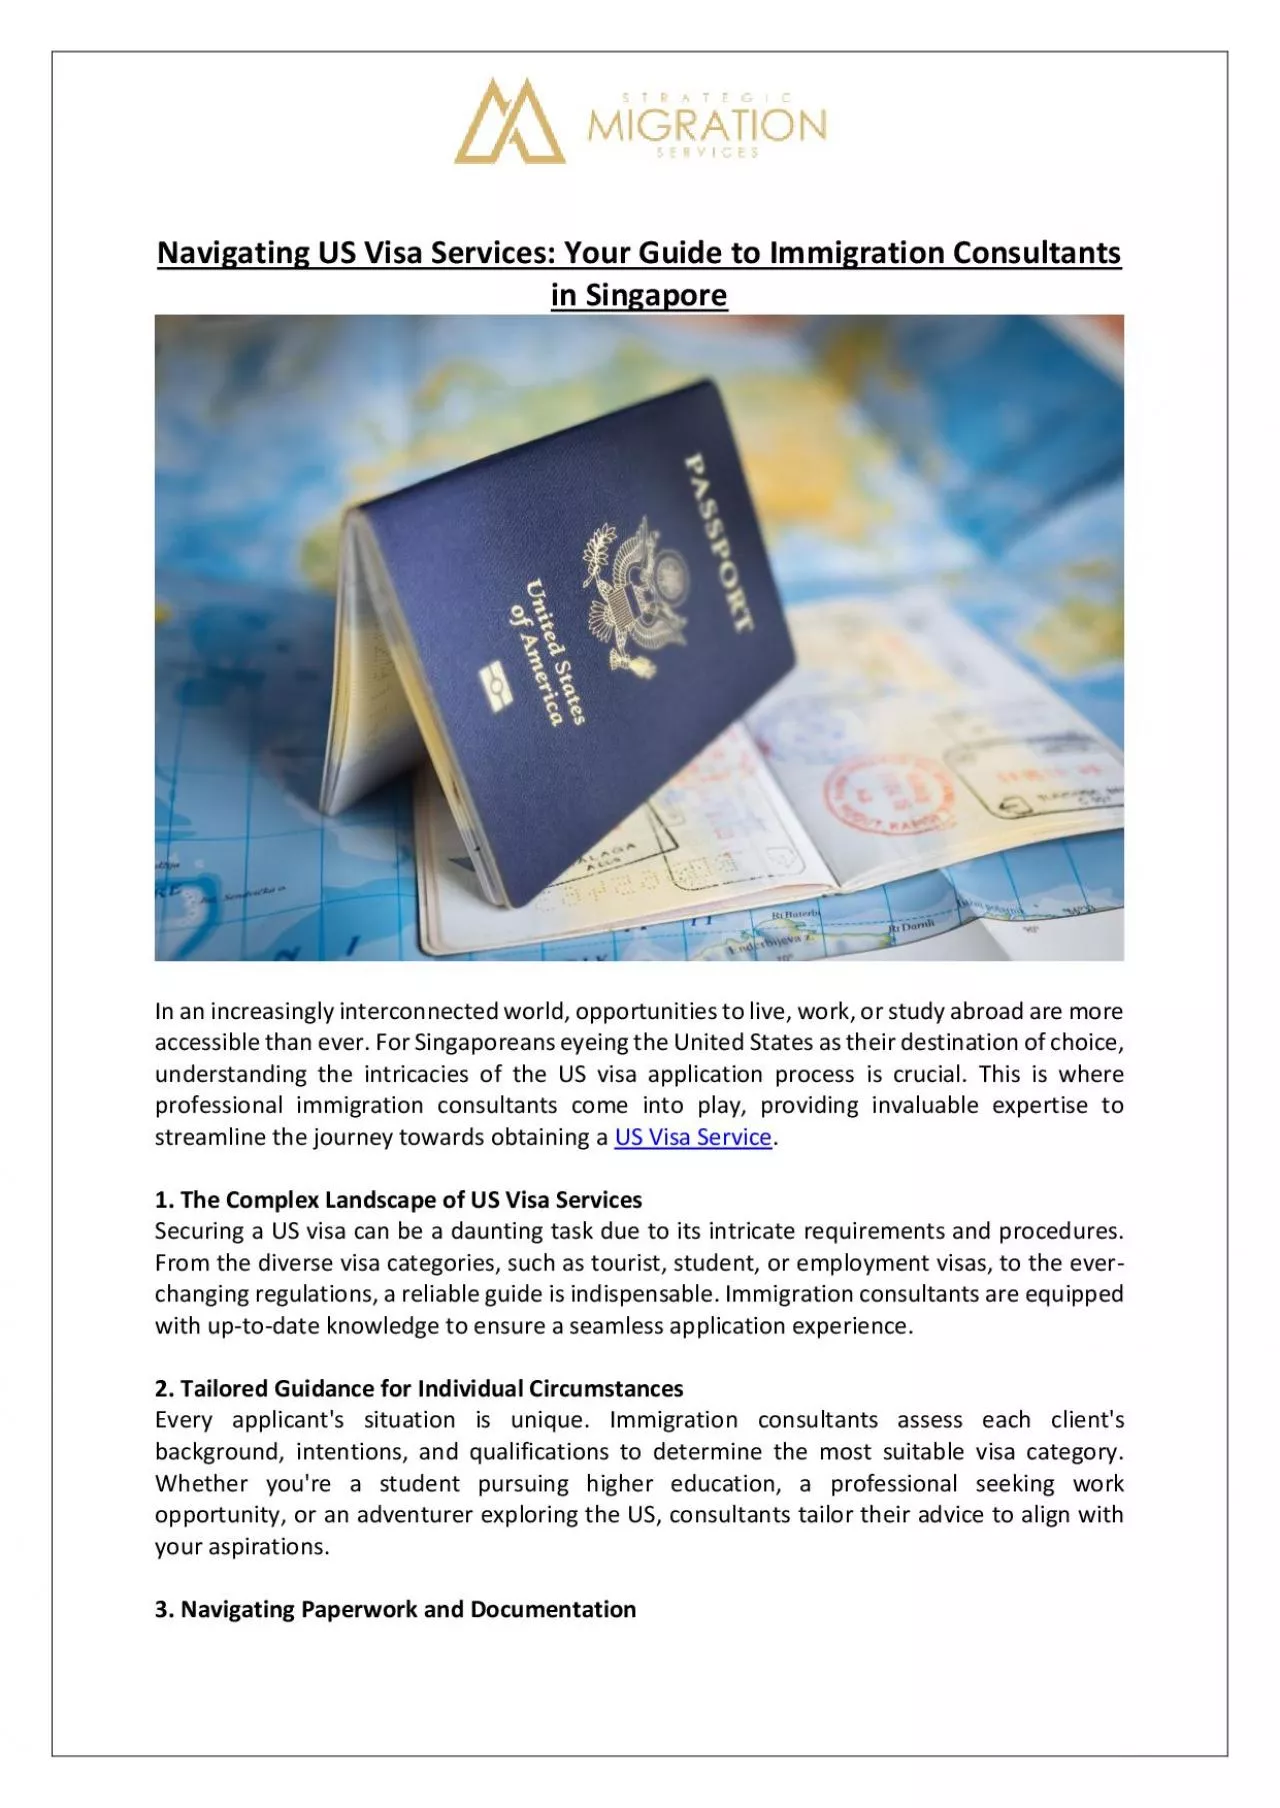 Strategic Migration Services - US Visa Services: Your Guide to Immigration Consultants